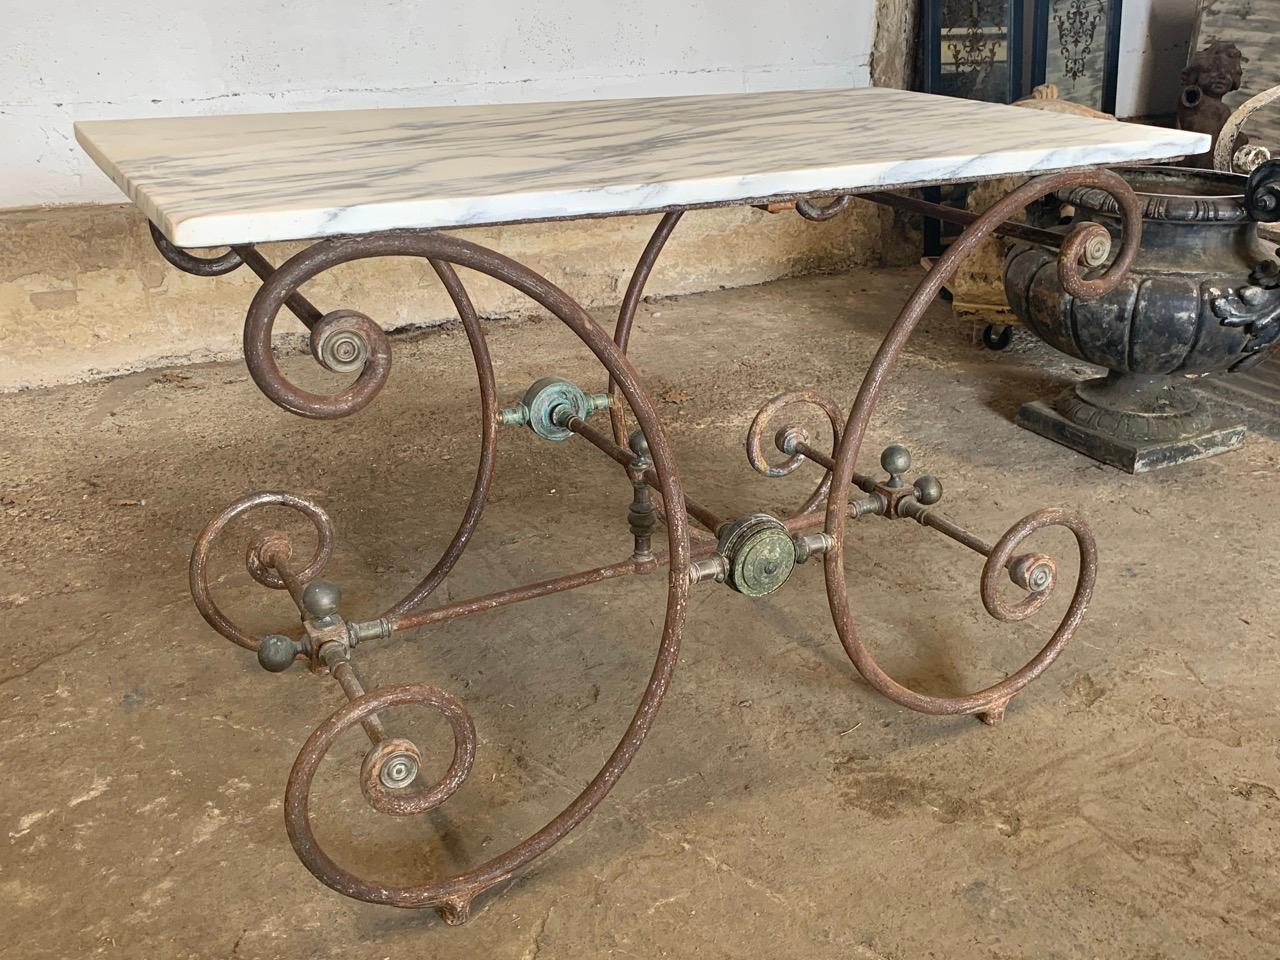 A lovely 19th century iron and marble butchers table from France. This would make a great garden table or would look just as good indoors.
Please contact us for an accurate shipping quote.